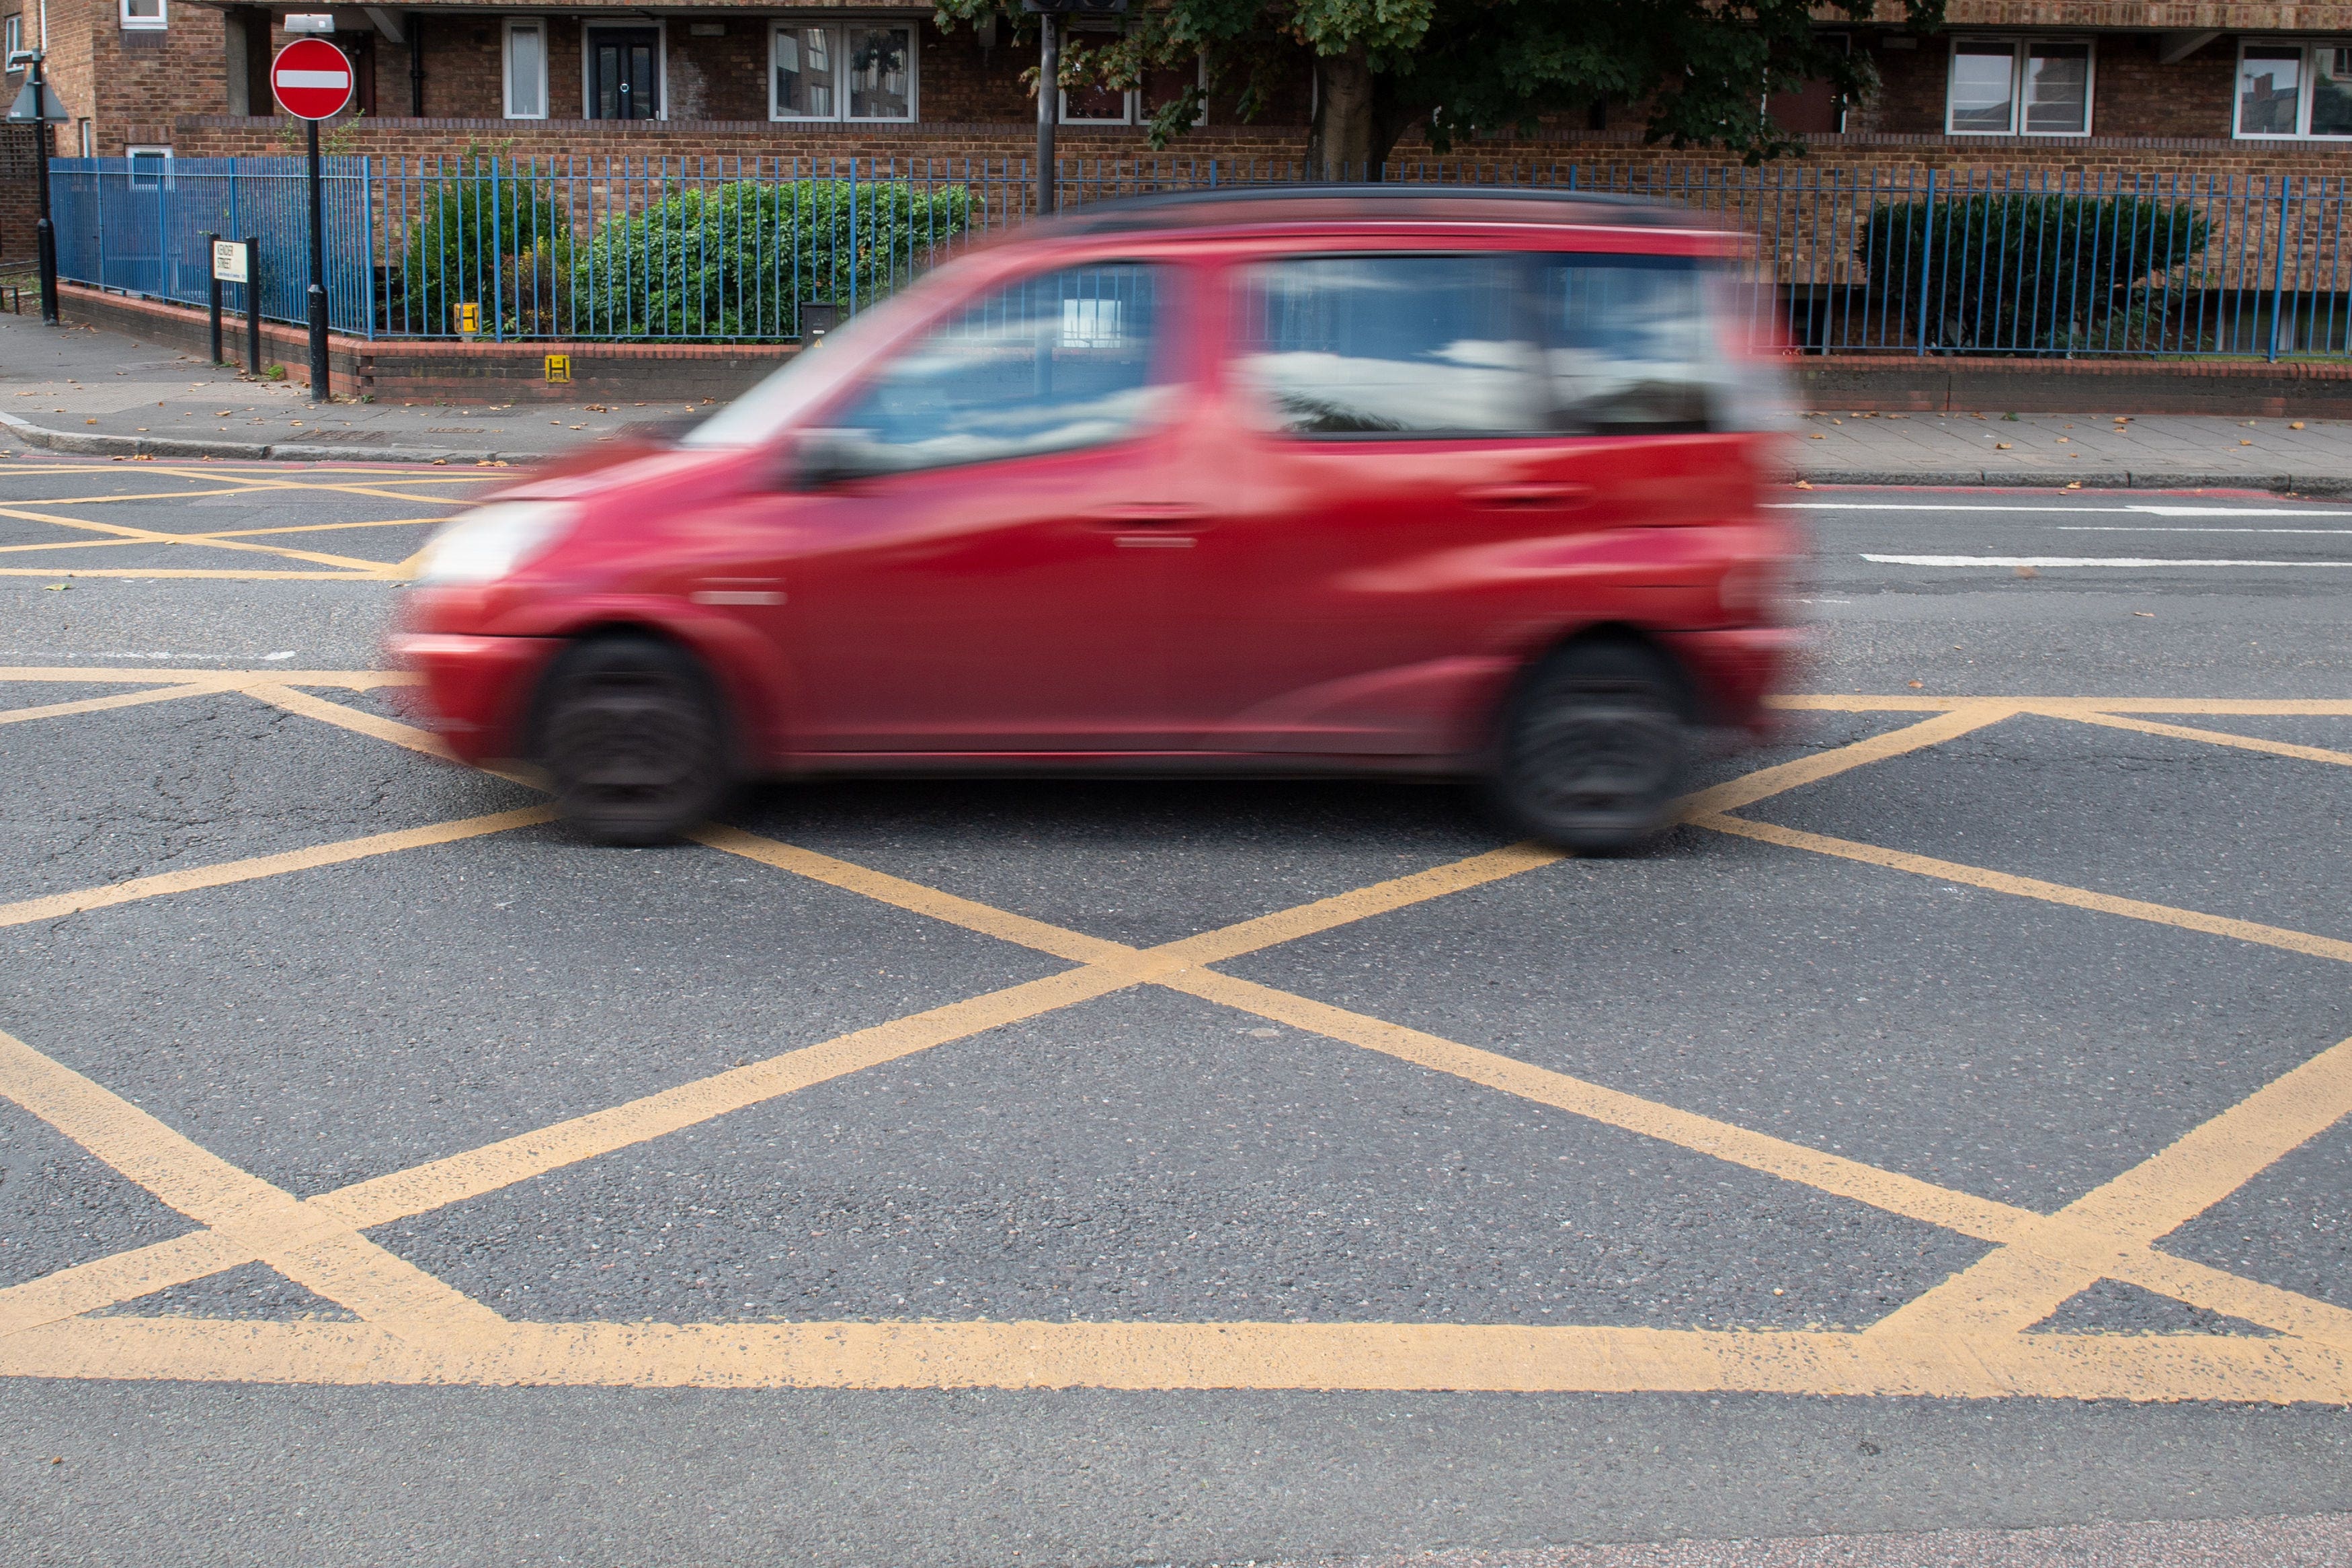 Drivers risk unfair fines for using most yellow box junctions which councils want enforcement powers over, according to a new report (Dominic Lipinski/PA)